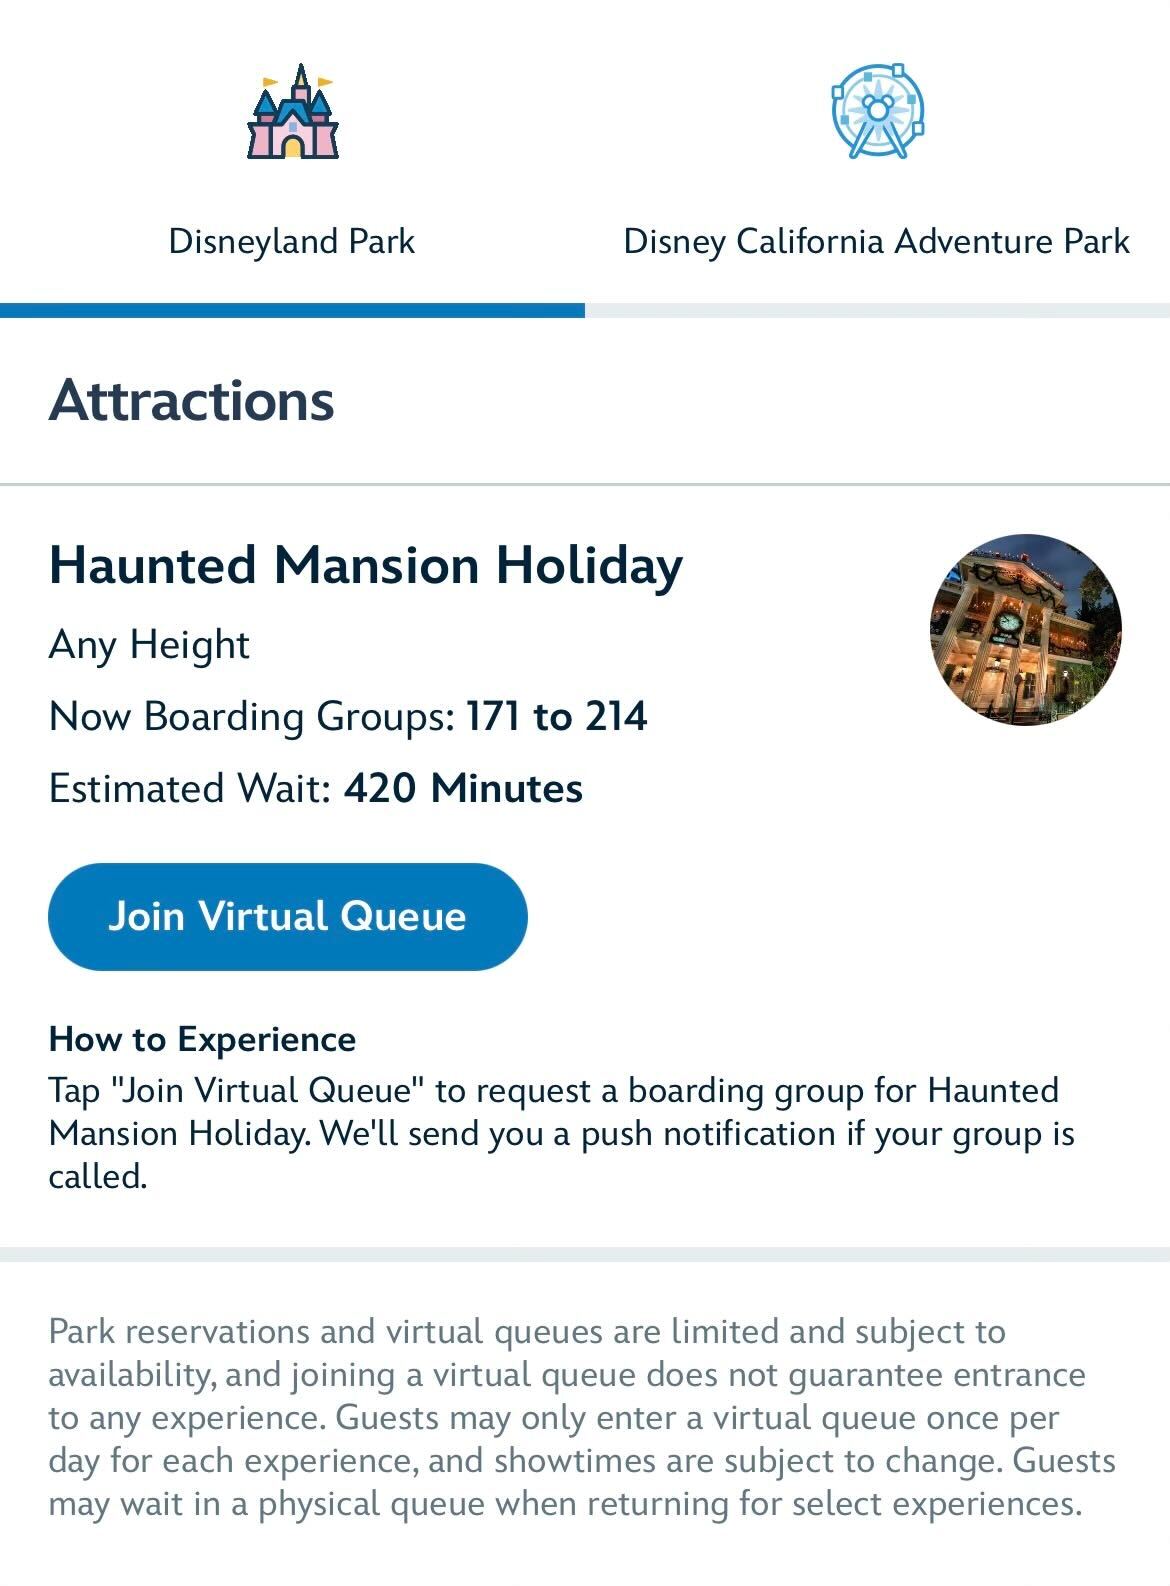 Virtual Queue for Haunted Mansion Holiday